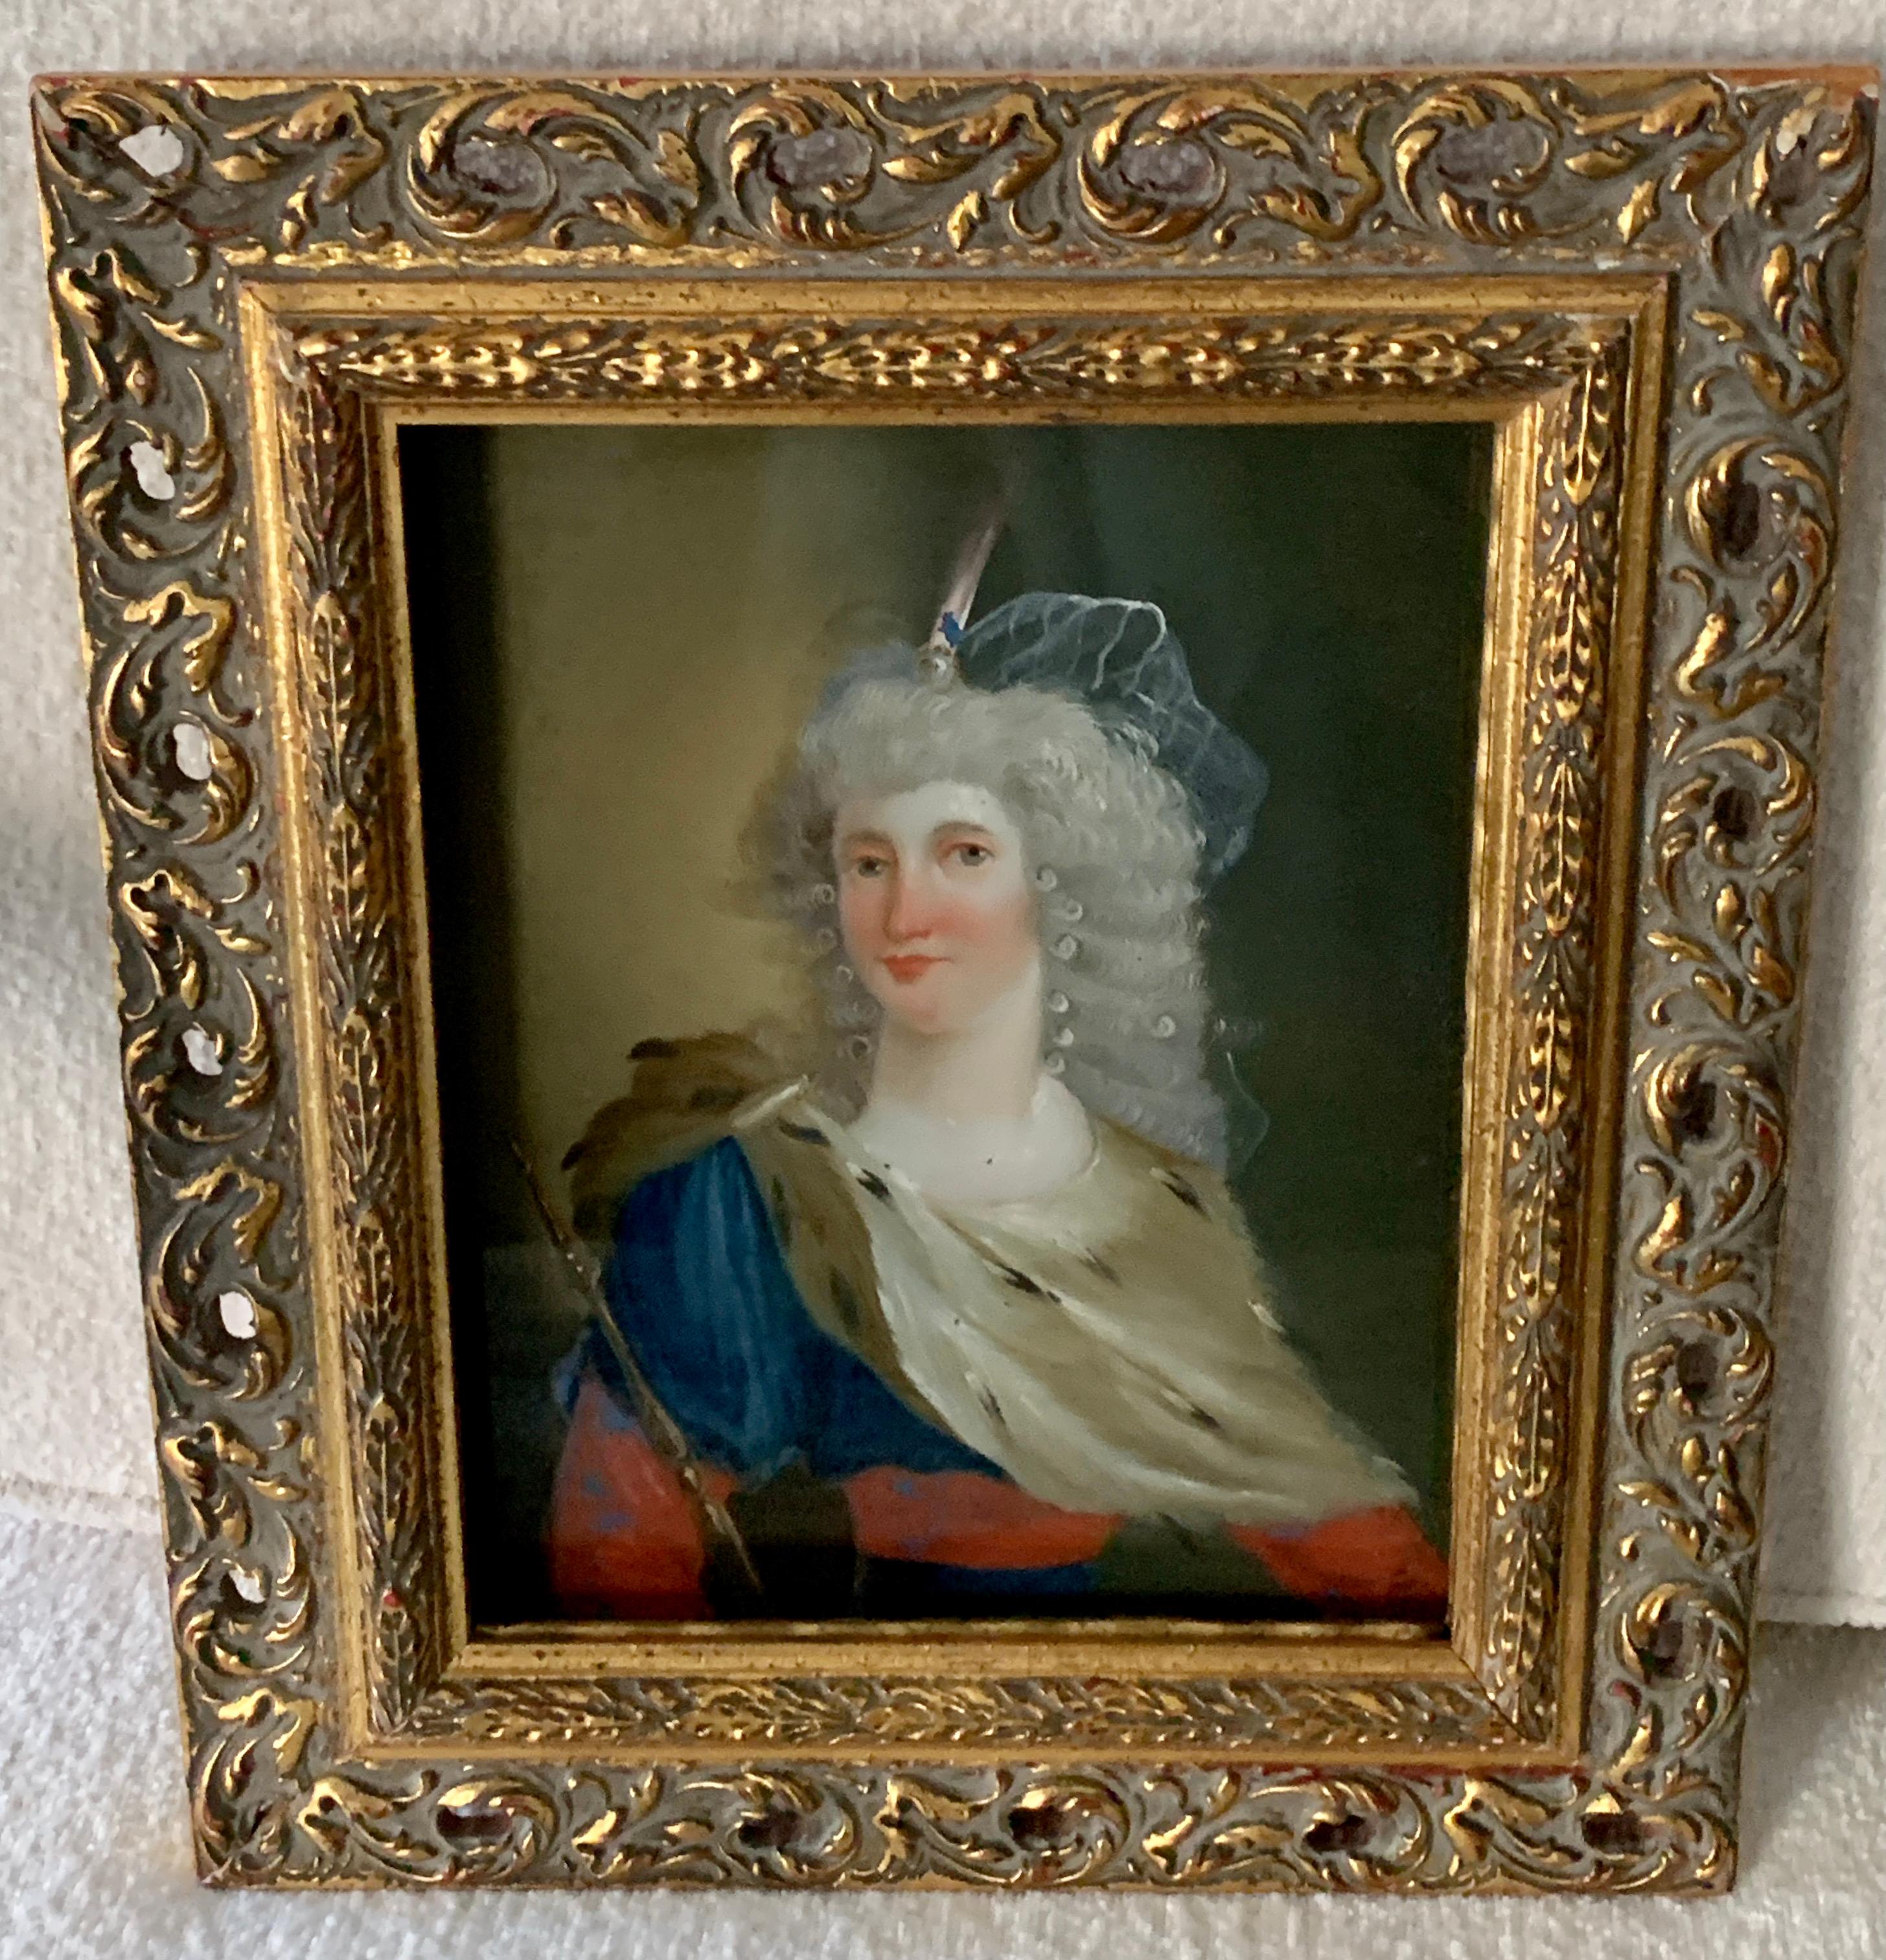 European 18th Century Reverse Painted Image on Glass in a Gilt Frame For Sale